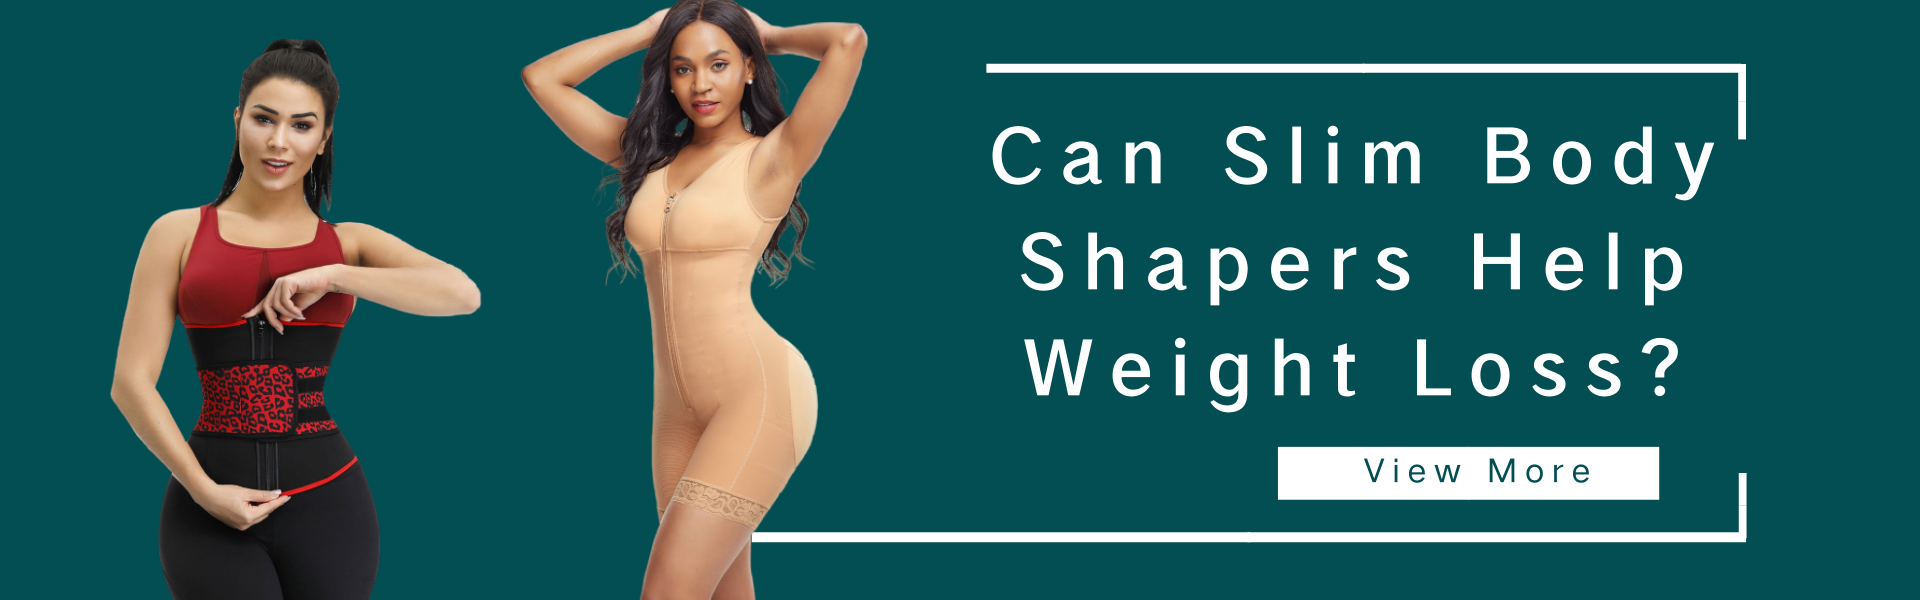 Can Slim Body Shapers Help Weight Loss?